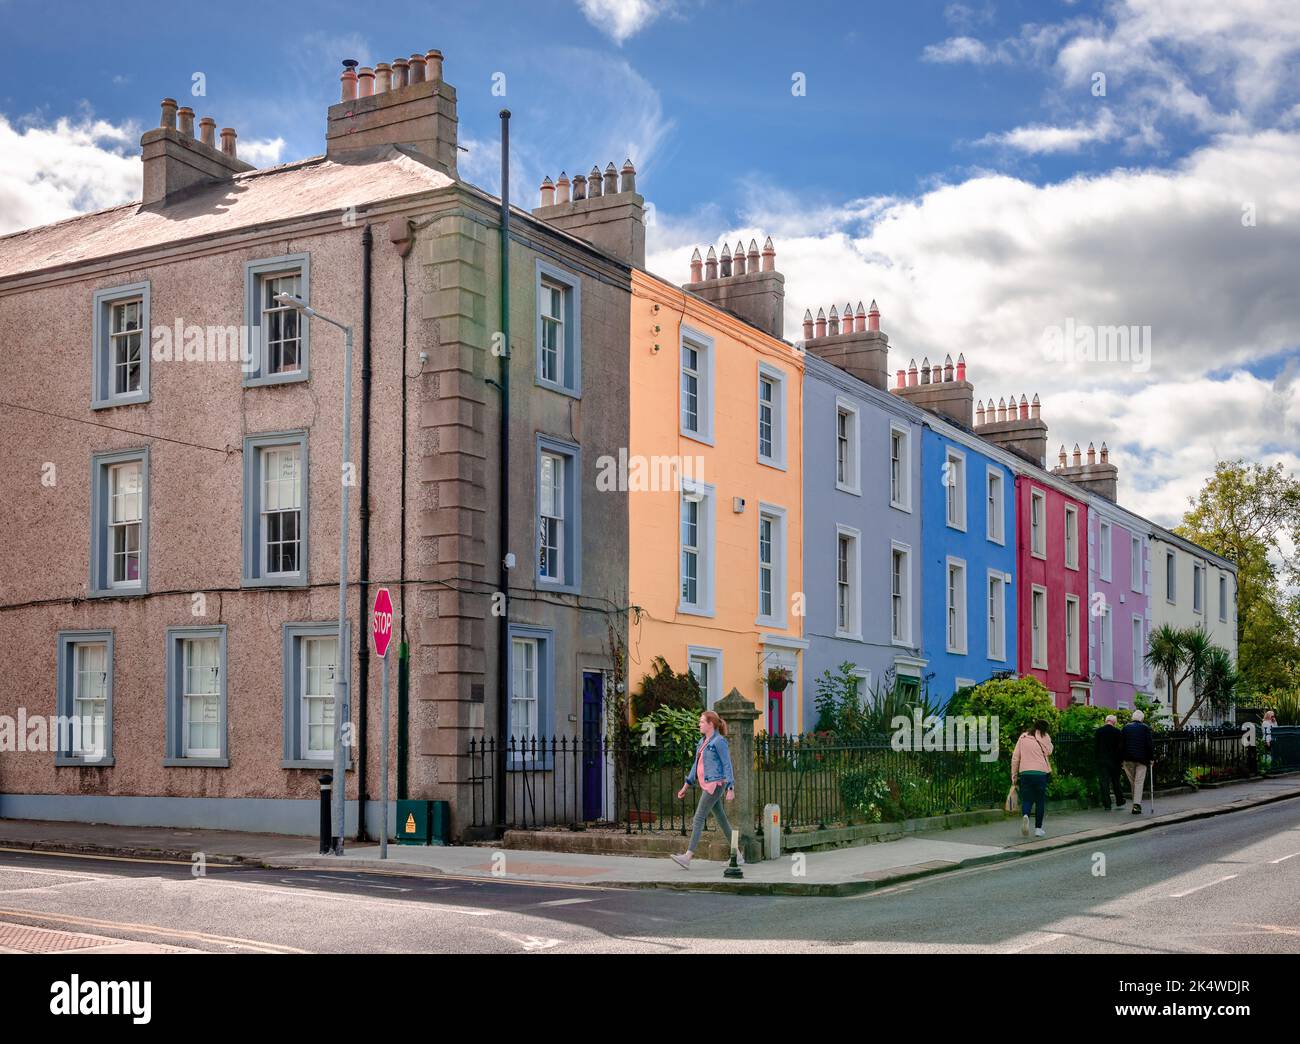 Malahide, Ireland - September 15 2022: Beautiful colorful terraced houses on the corner of Malahide Rd and St Margaret's Rd. Stock Photo